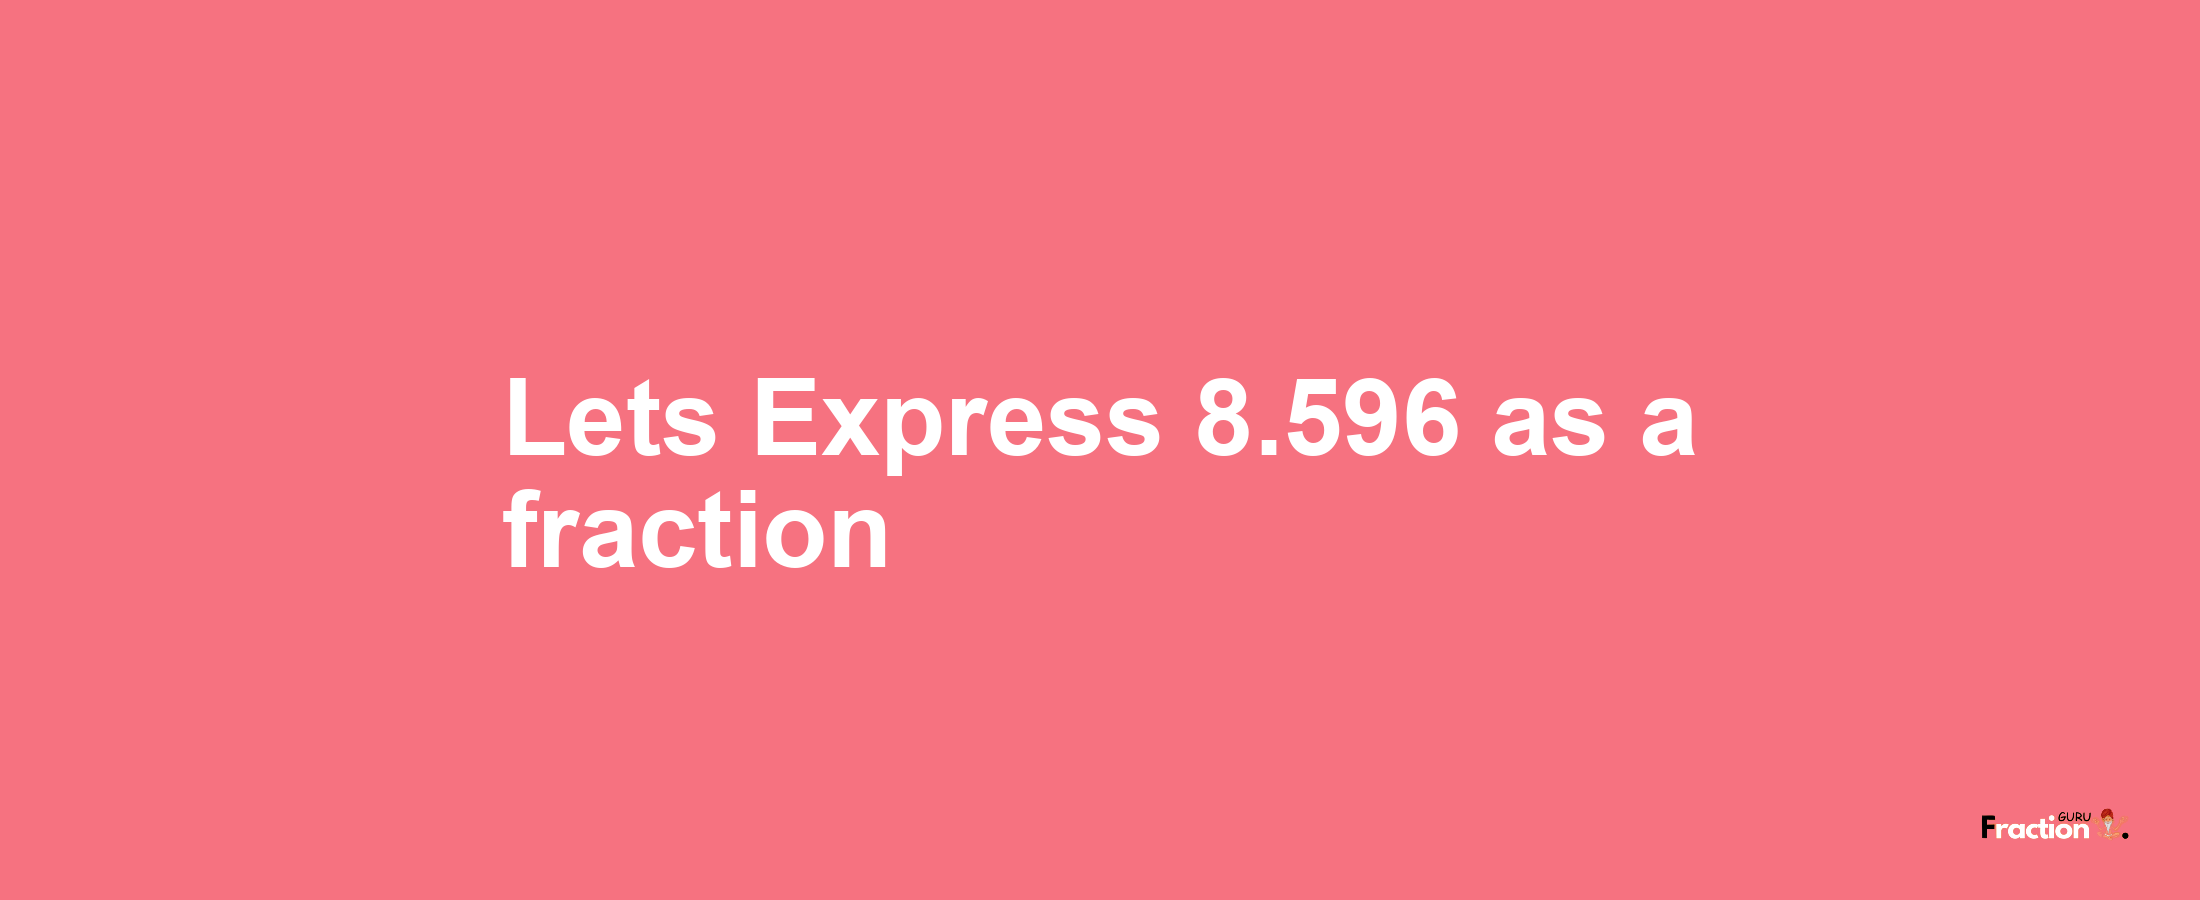 Lets Express 8.596 as afraction